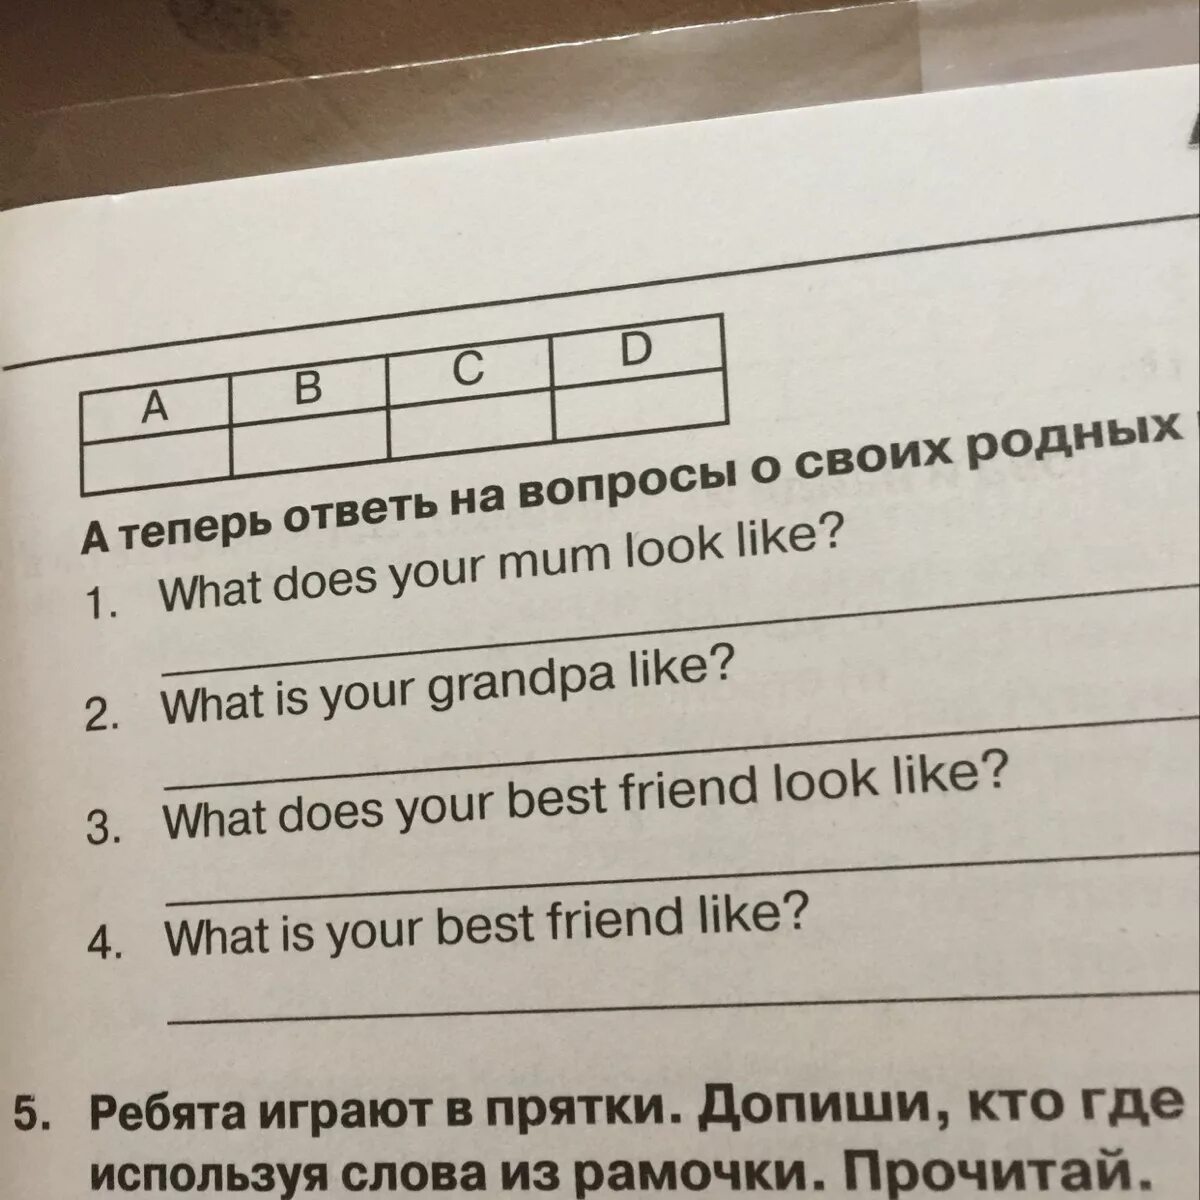 Does your friend like. What is does your best friend look like перевод. Вопросы с what does. What is your friend like перевод. What do you look like ответ на вопрос.